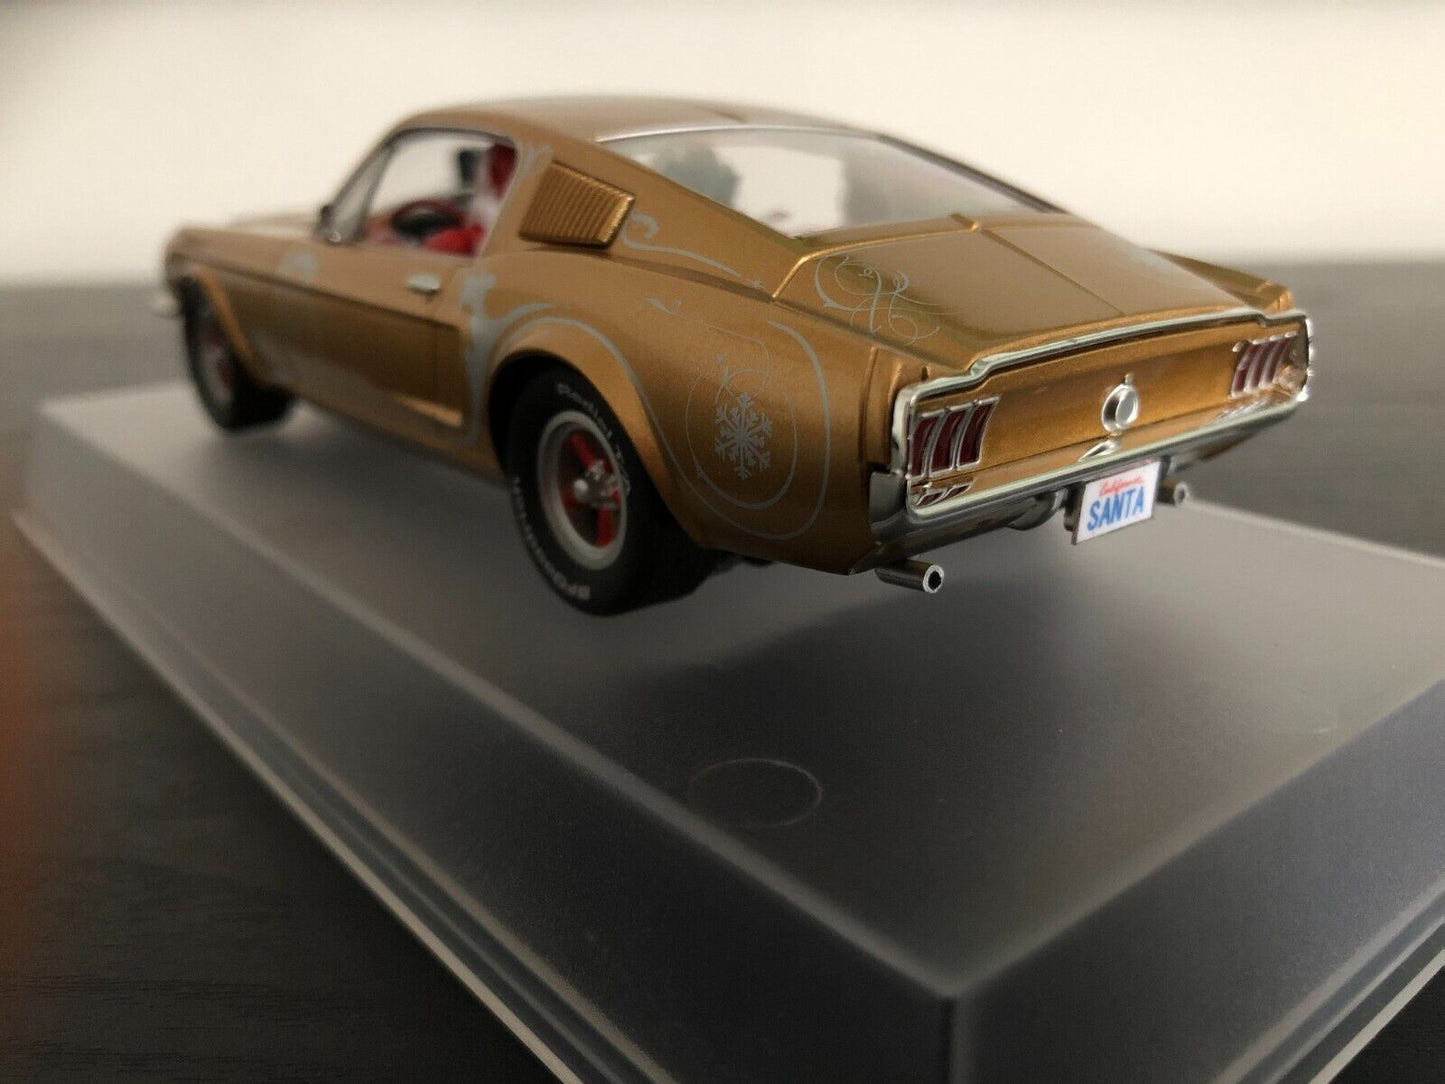 Pioneer Slot Car 68 Mustang Fastback GT Christmas Special  P038 Limited Edition